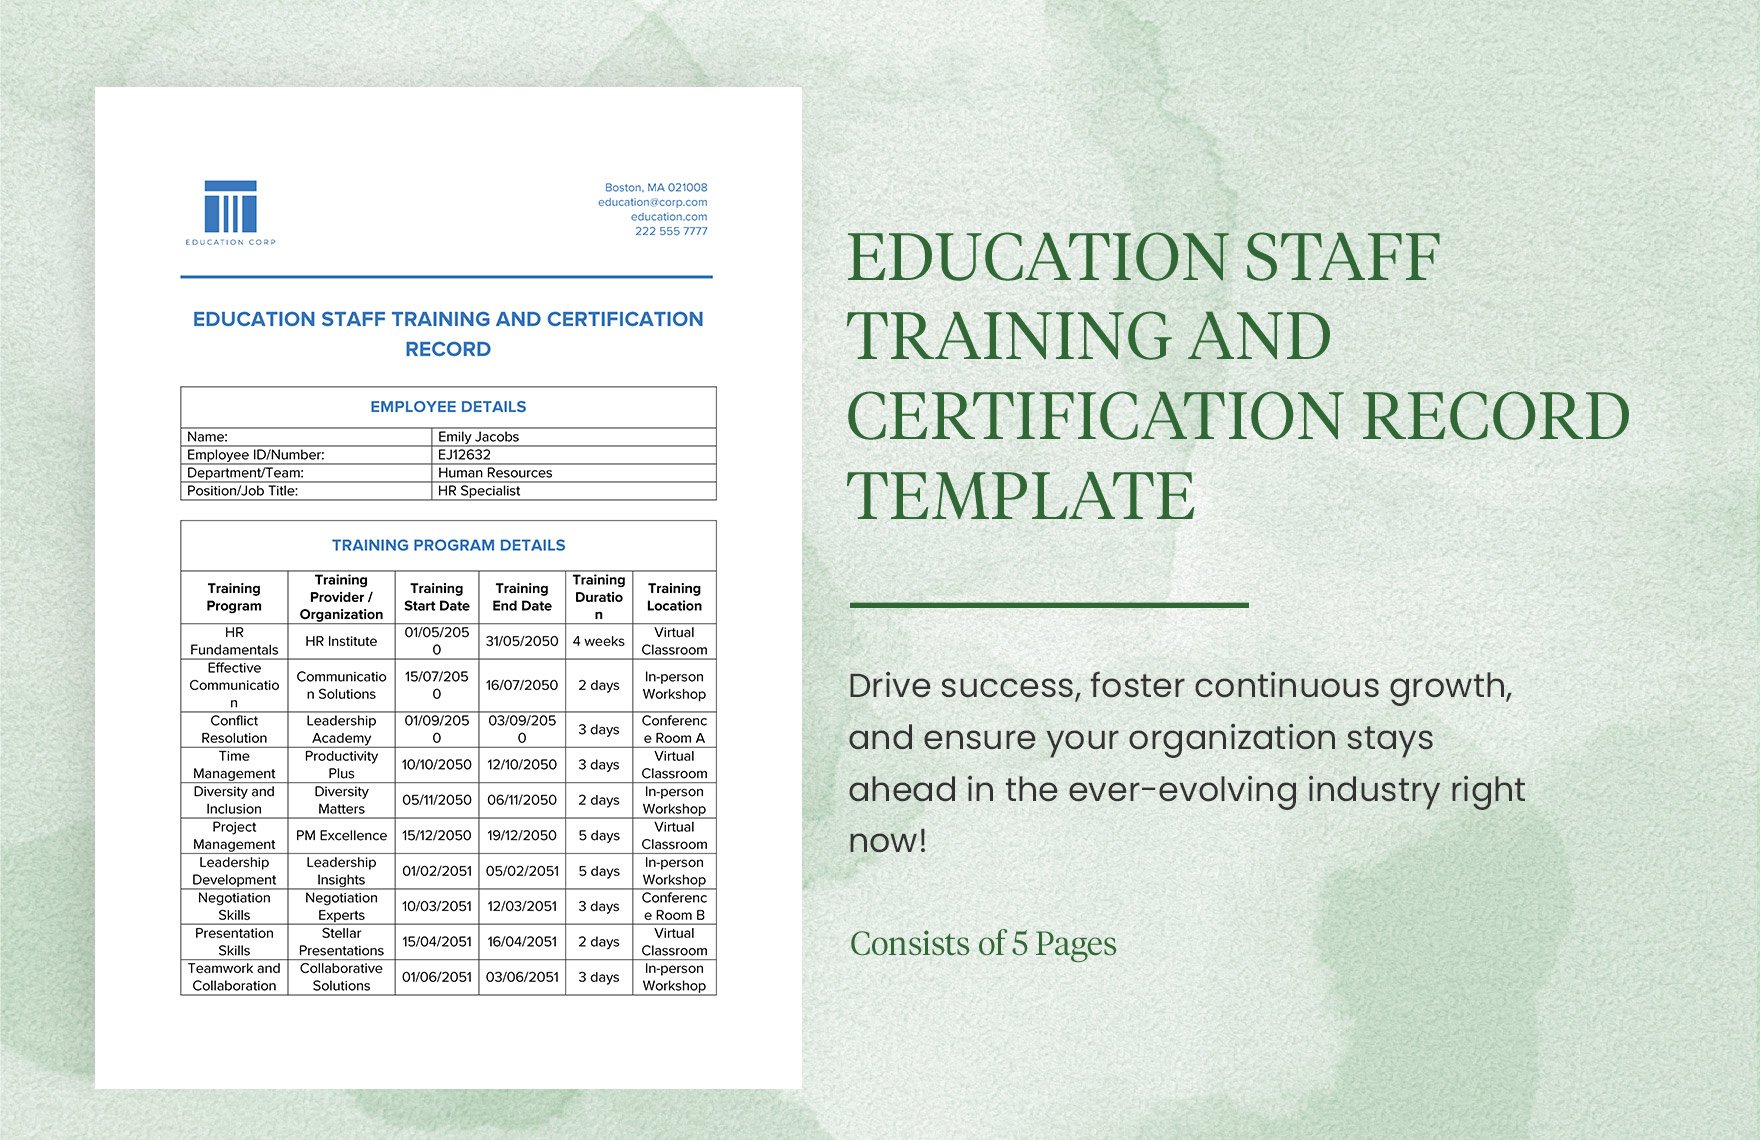 Education Staff Training and Certification Record Template